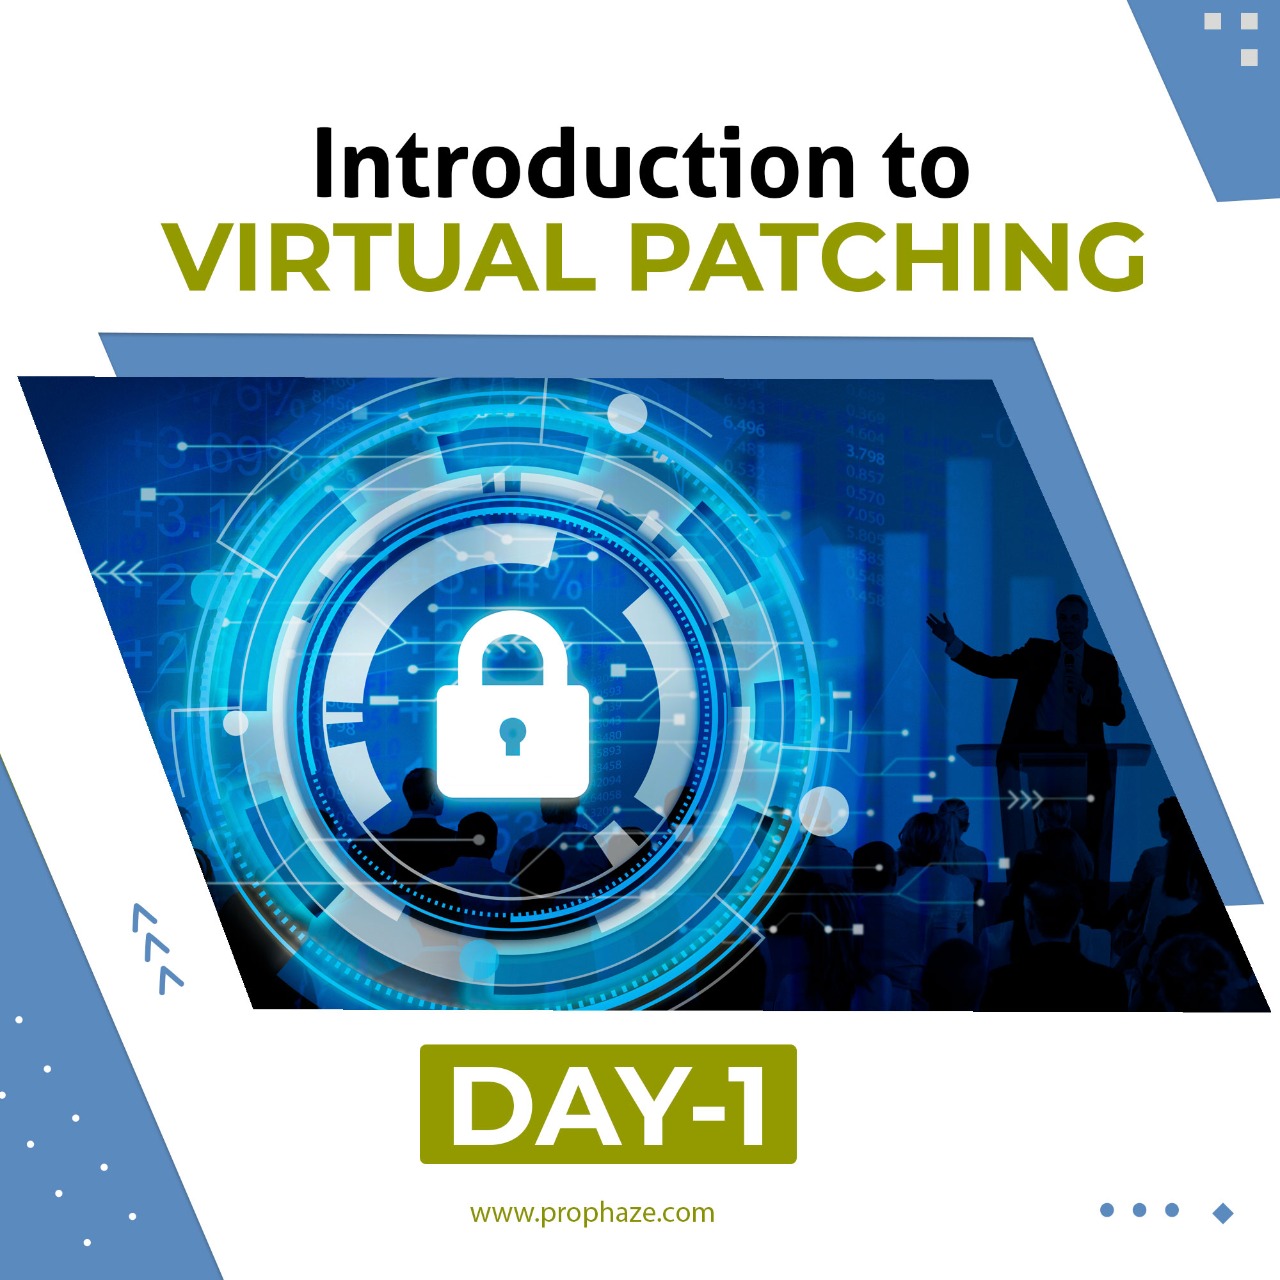 00480 Up En Ifg How Virtual Patching Helps Protect Enterprises